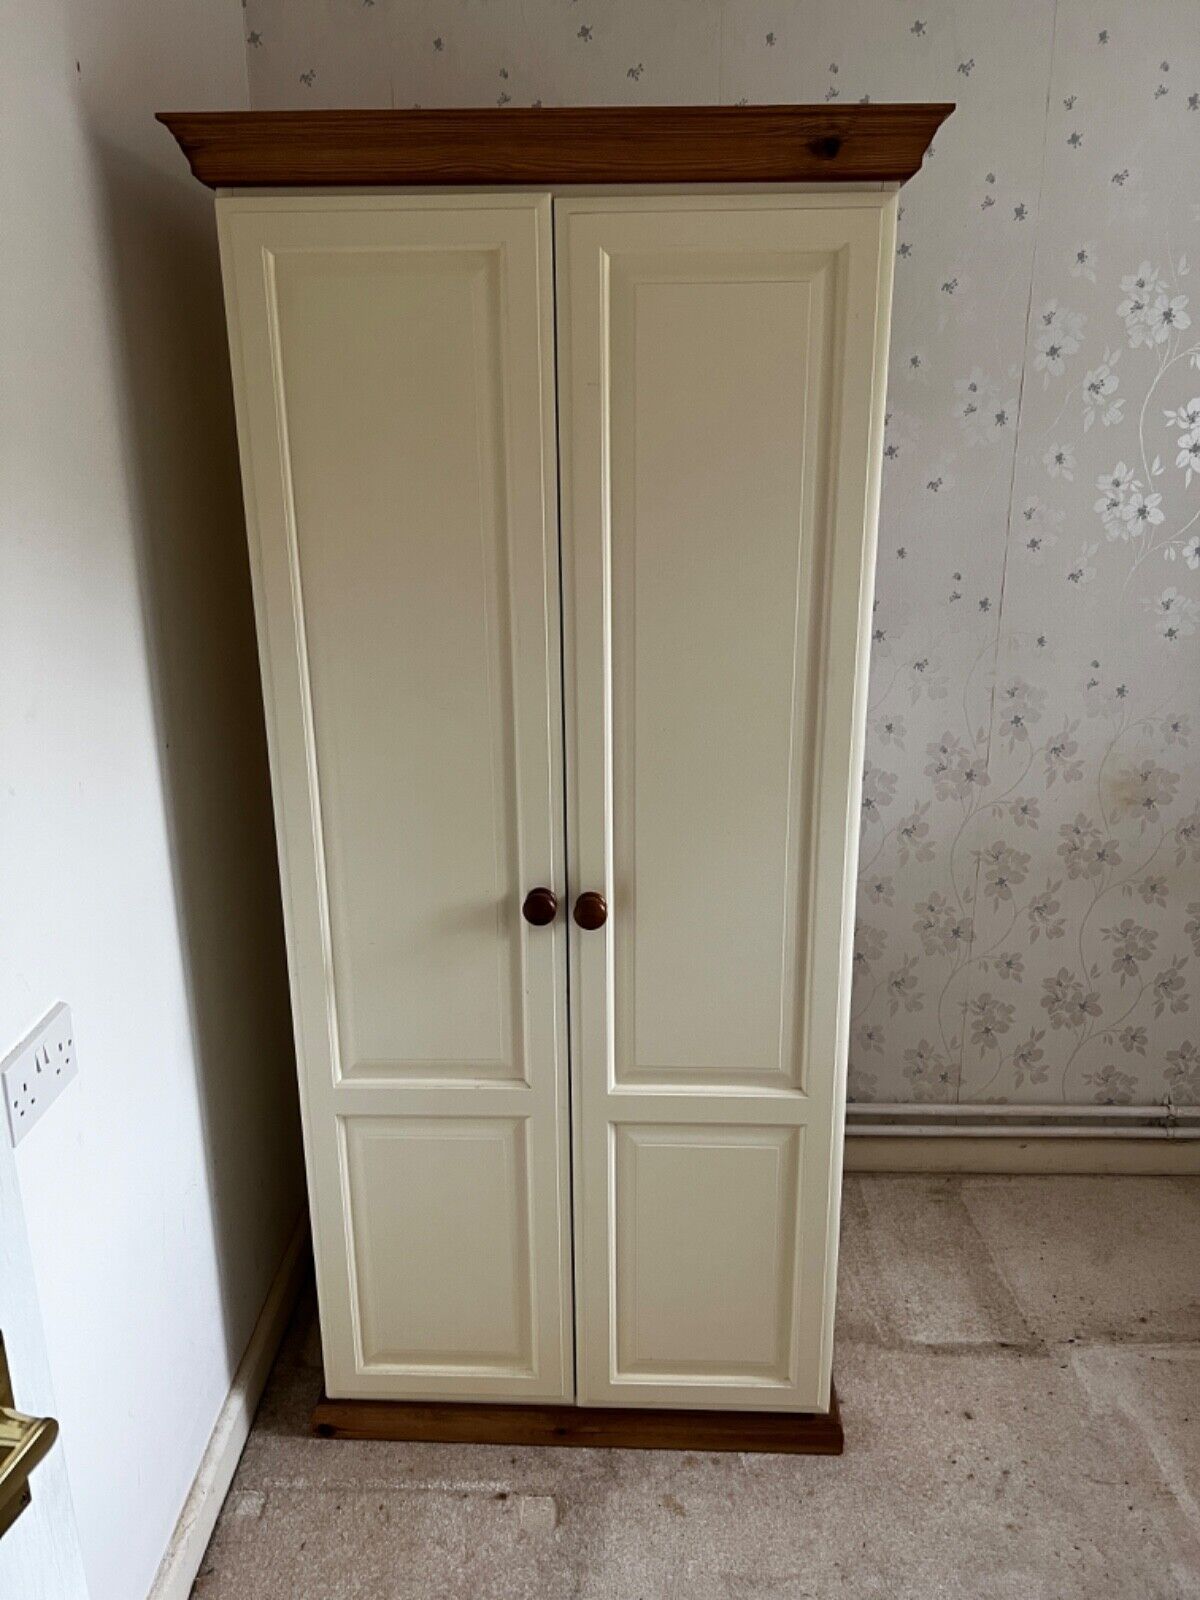 Cream Coloured Double Wardrobe Wooden Trim Hanging Rail Bedroom Storage  Cheap | Ebay Inside Cheap Wardrobes (View 8 of 9)